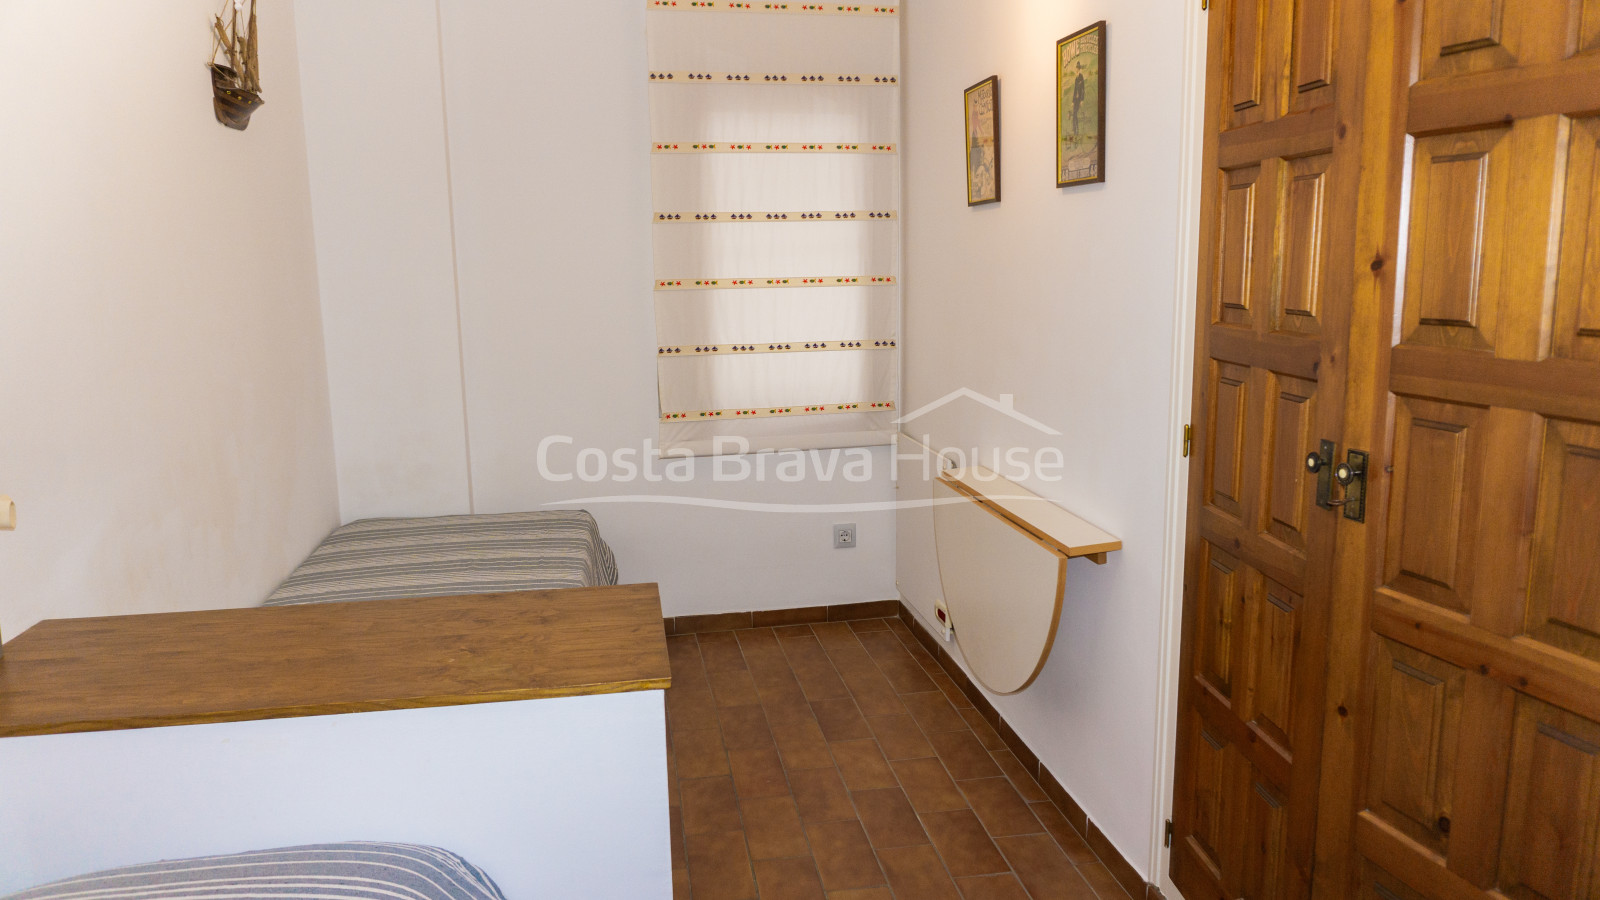 Flat in perfect condition for sale in the centre of Calella Palafrugell, 2 min walk from the beach